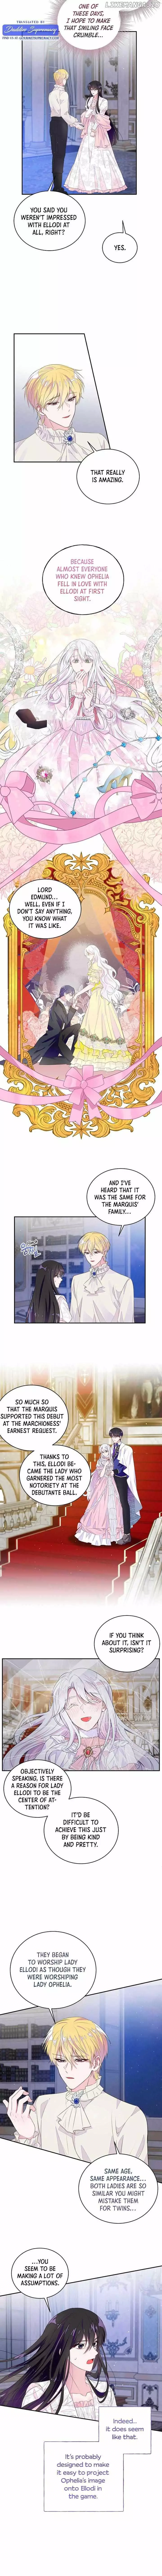 The Bad Ending Of The Otome Game - 37 page 2-1481f46b